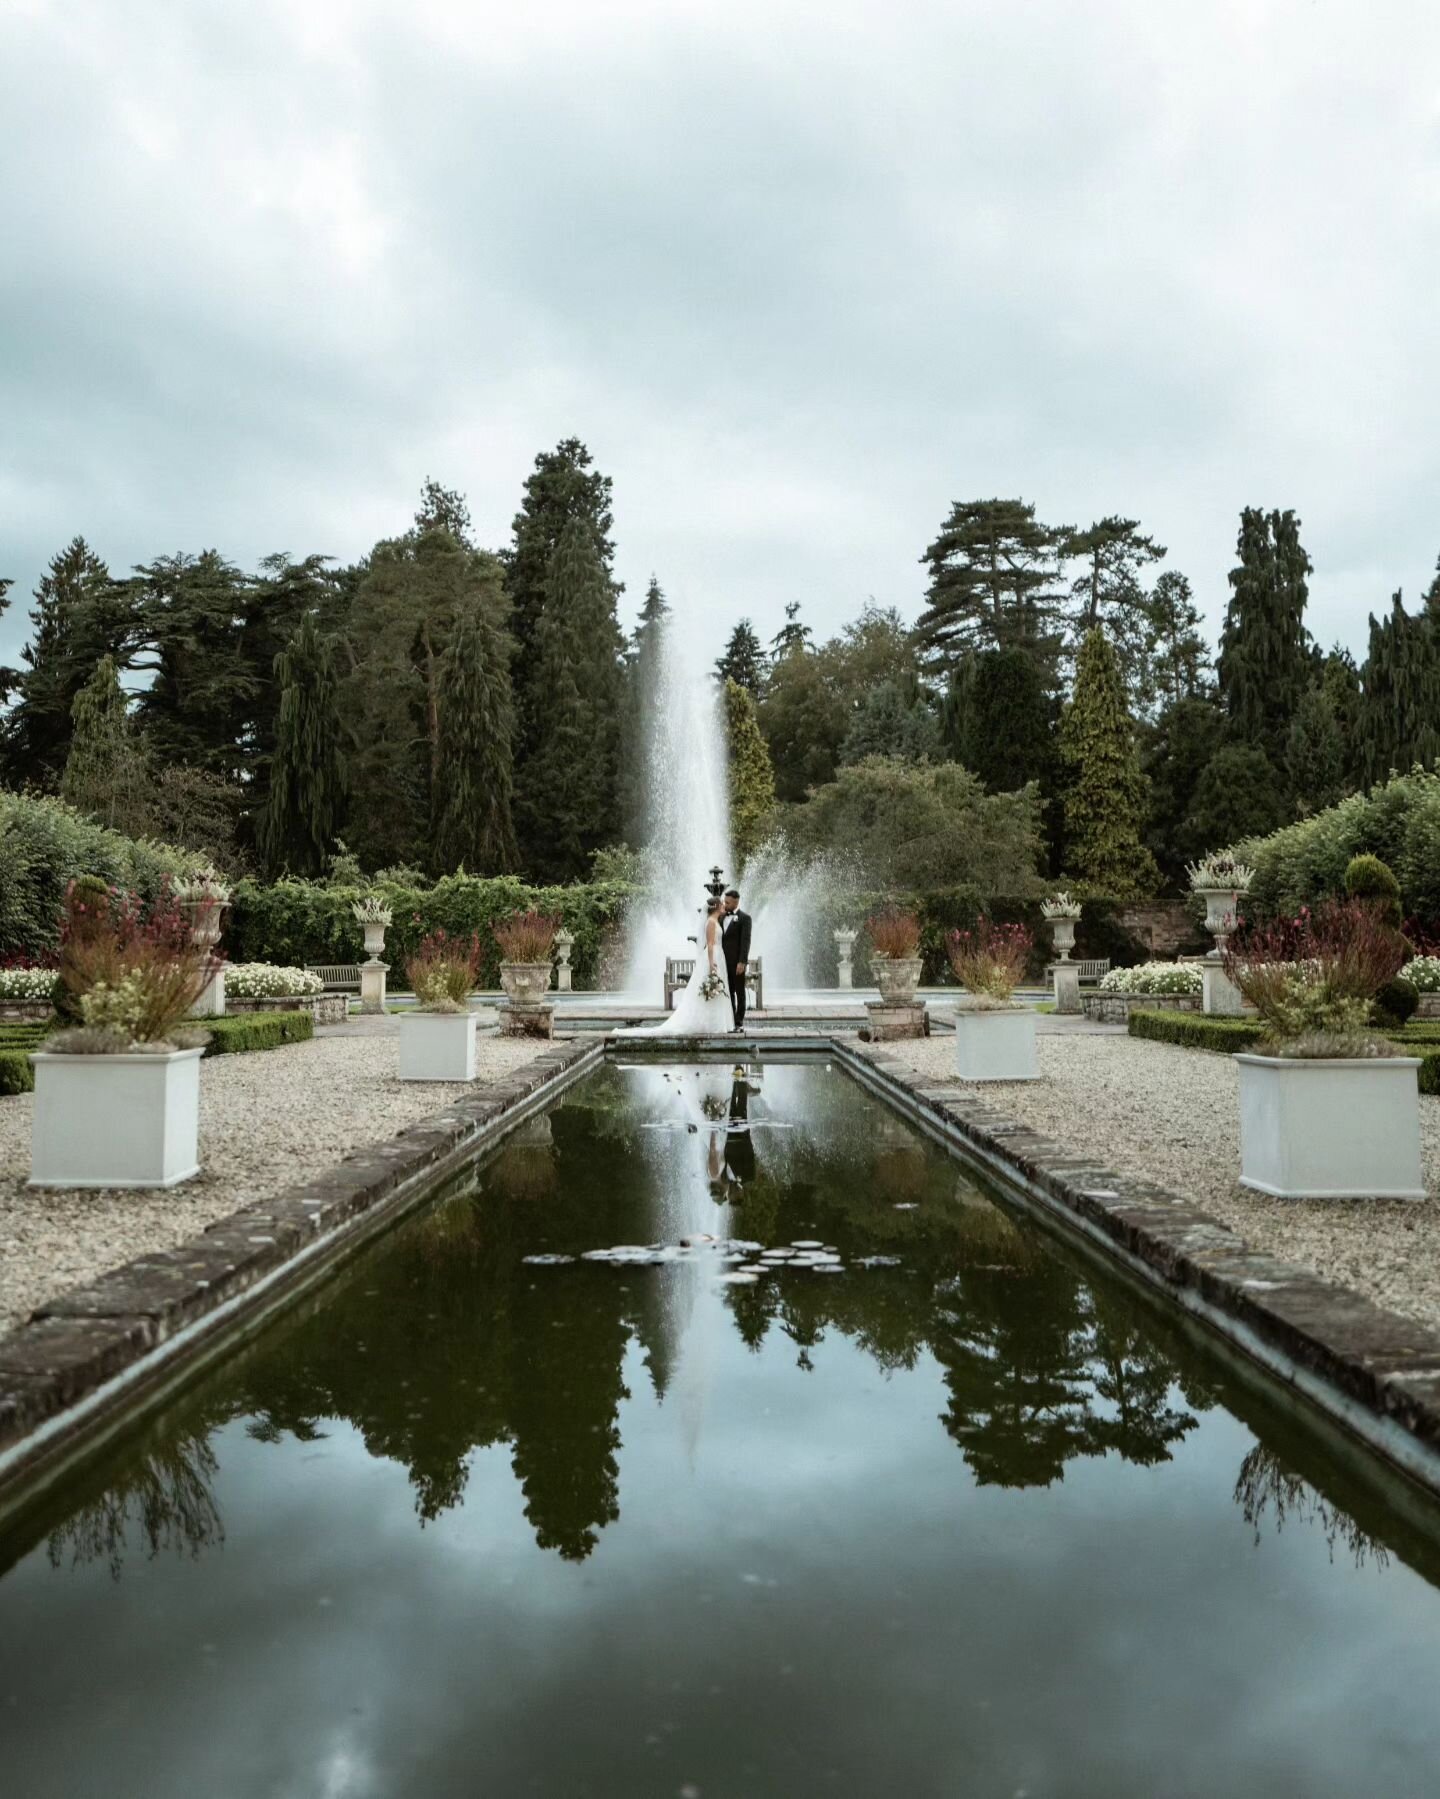 I do love a good reflection shot 📸

A few frames from @jadehindmasih &amp; @ezy10_23

Was an honour to shoot photo &amp; video for this one!

Venue - @arleyhouse_events
Photo &amp; Video - @wheelandspoke
Florist &amp; Venue Styling - @buntingandwill